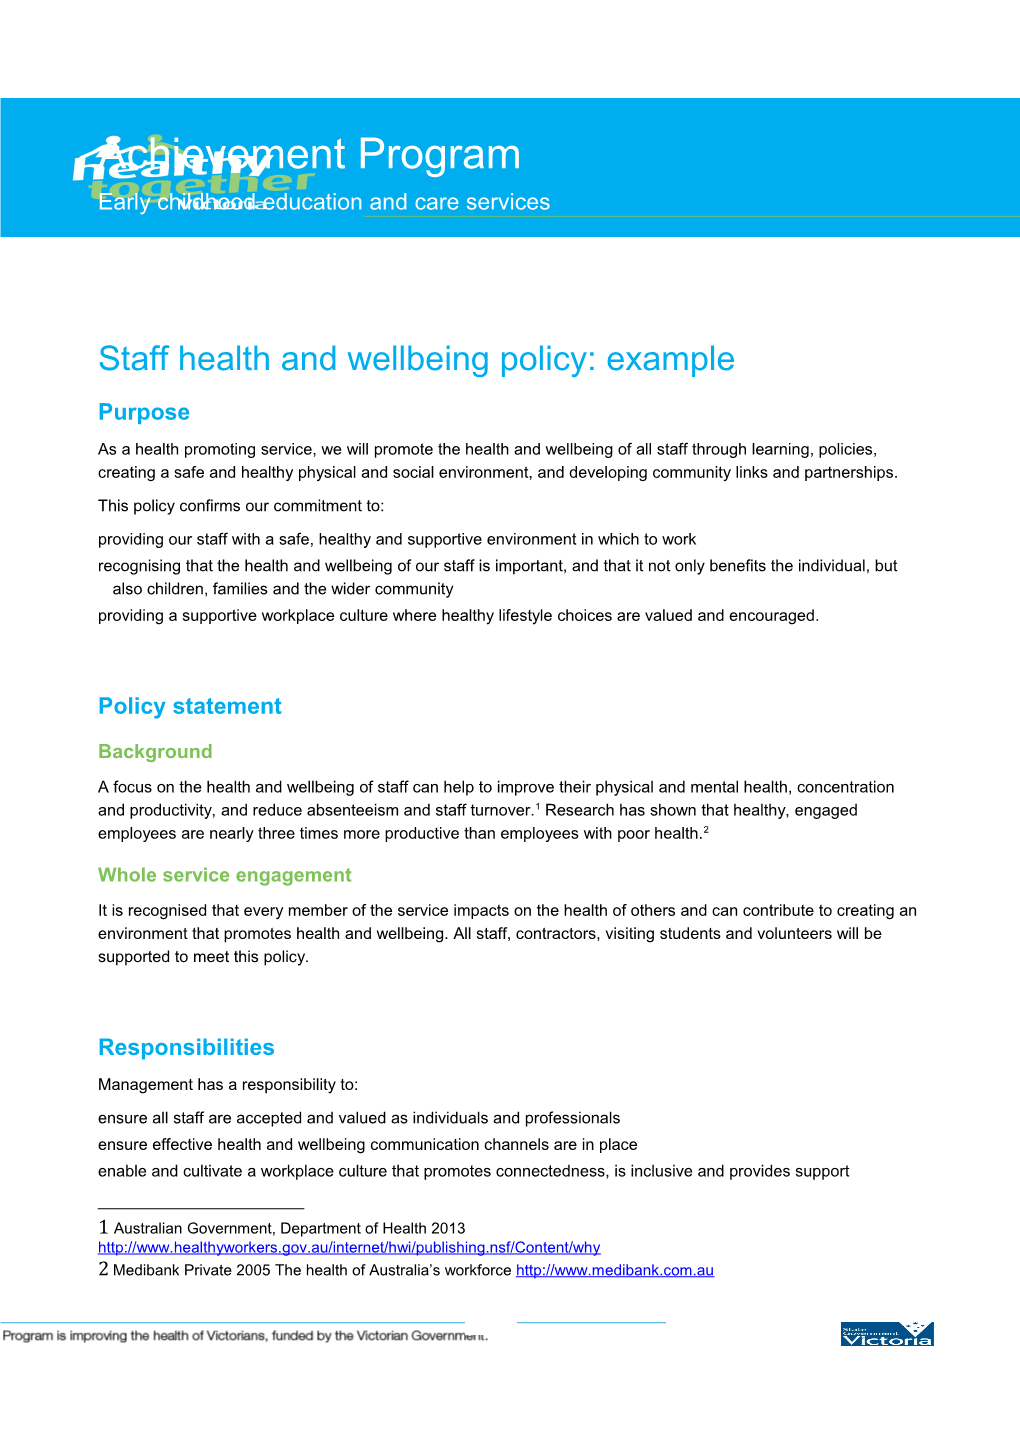 ECEC Staff Health and Wellbeing Policy Example